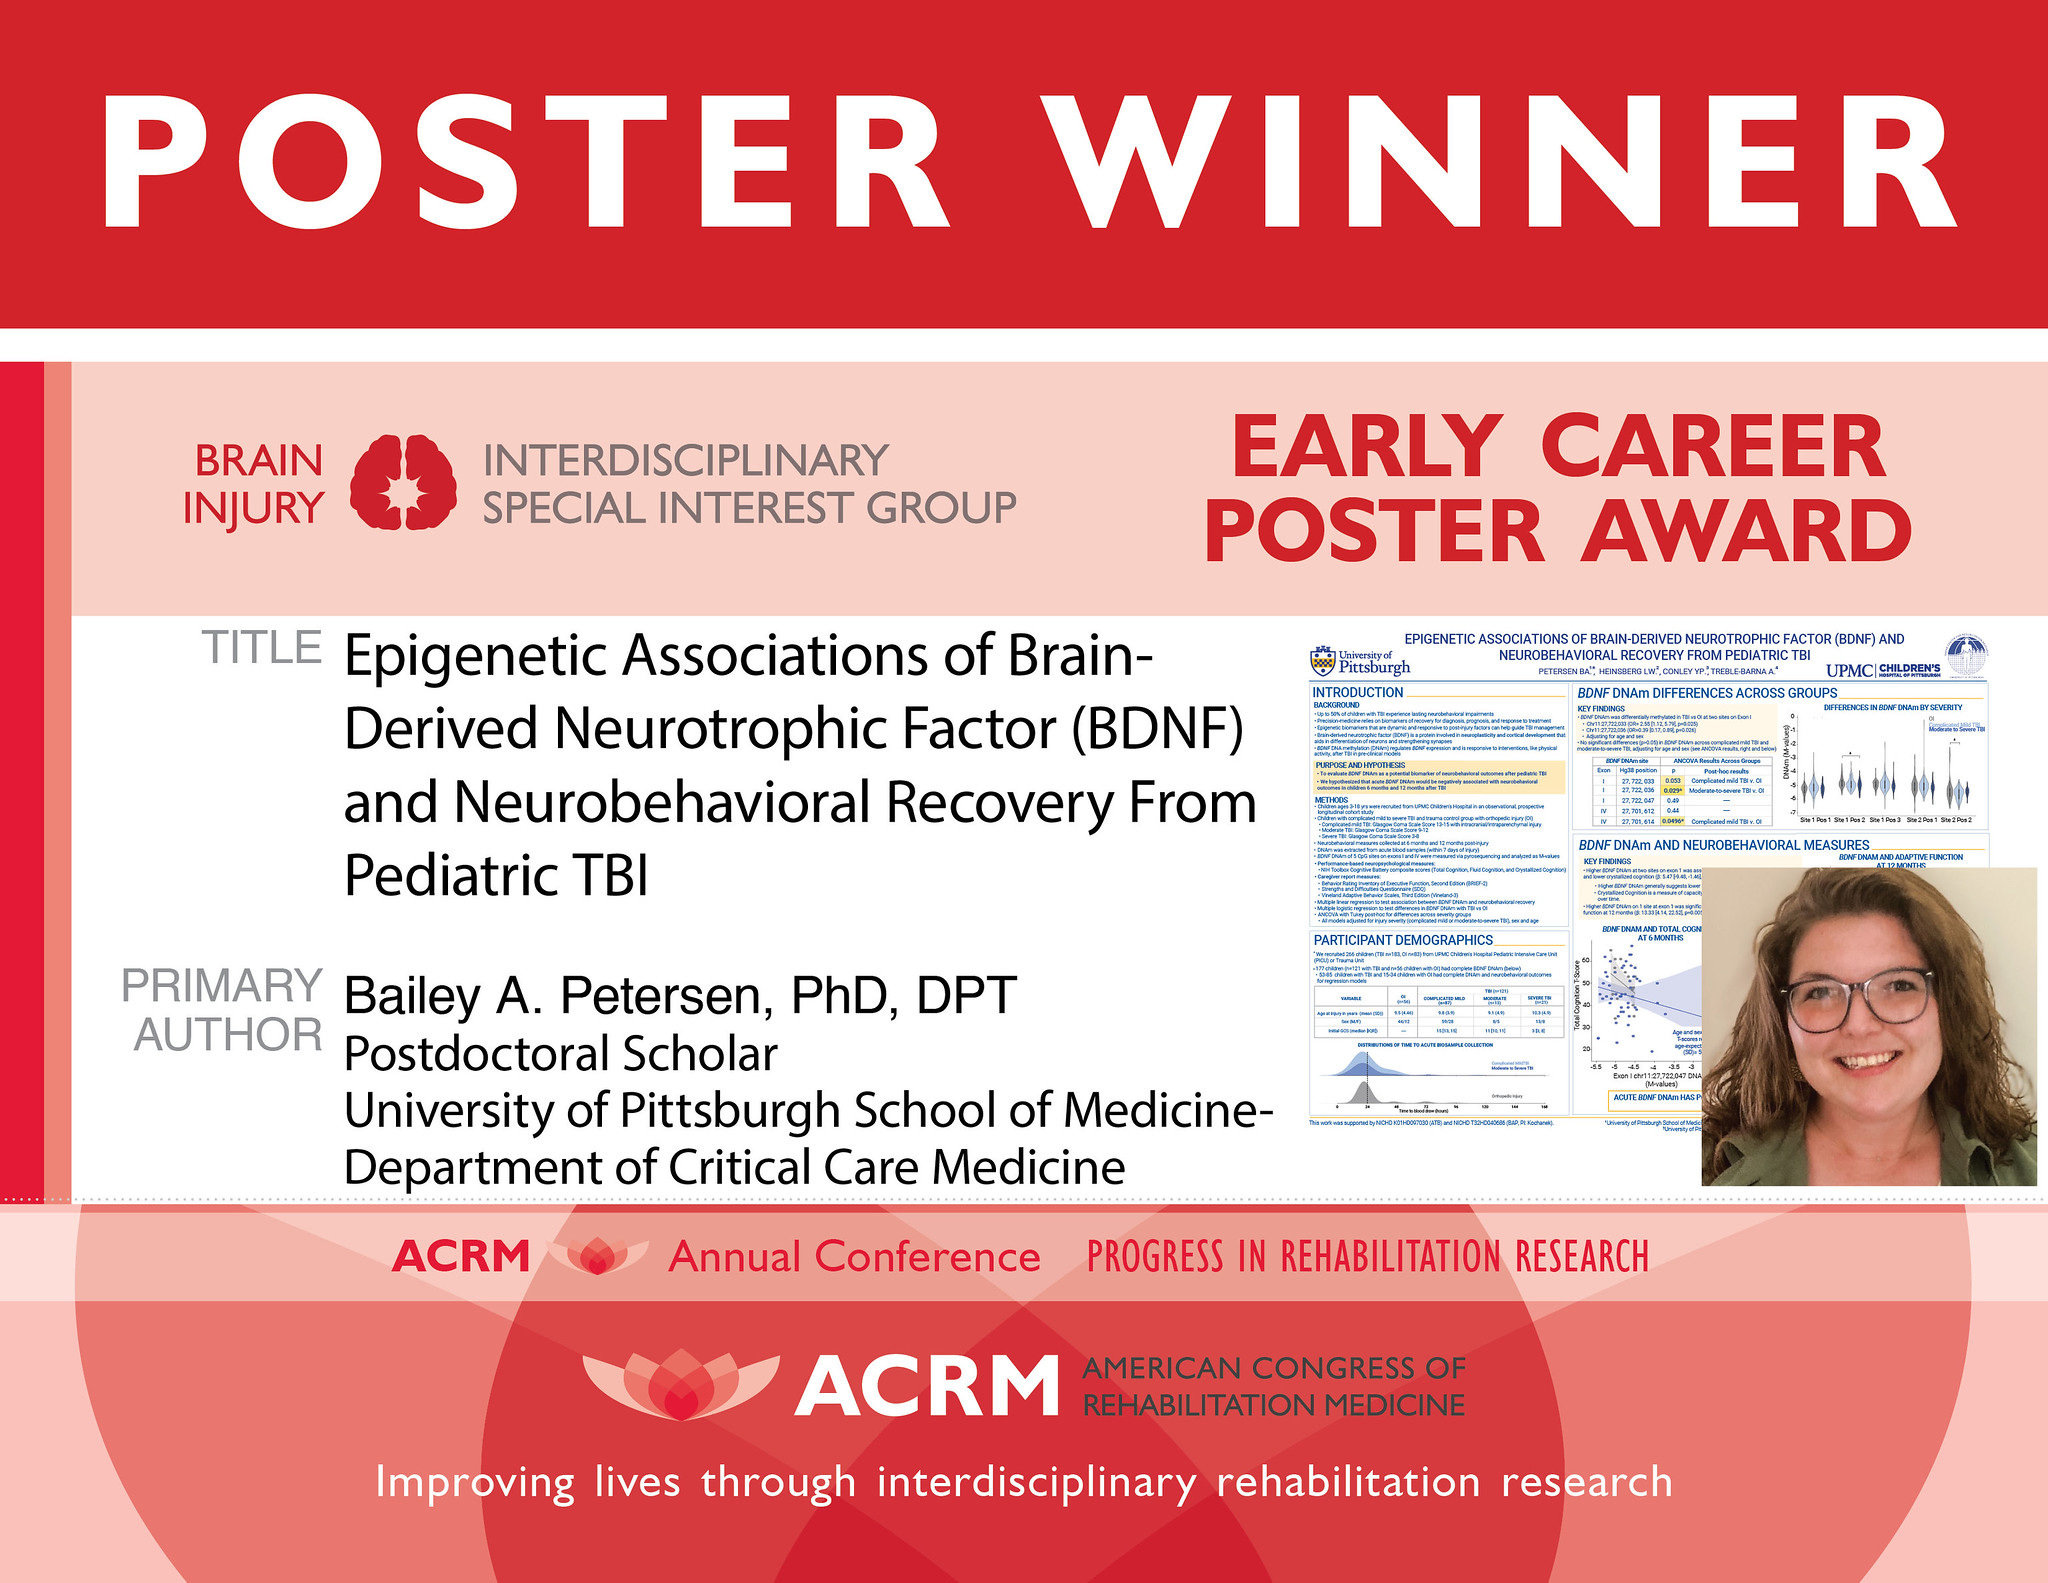 Brain Injury ISIG Early Career Best Poster